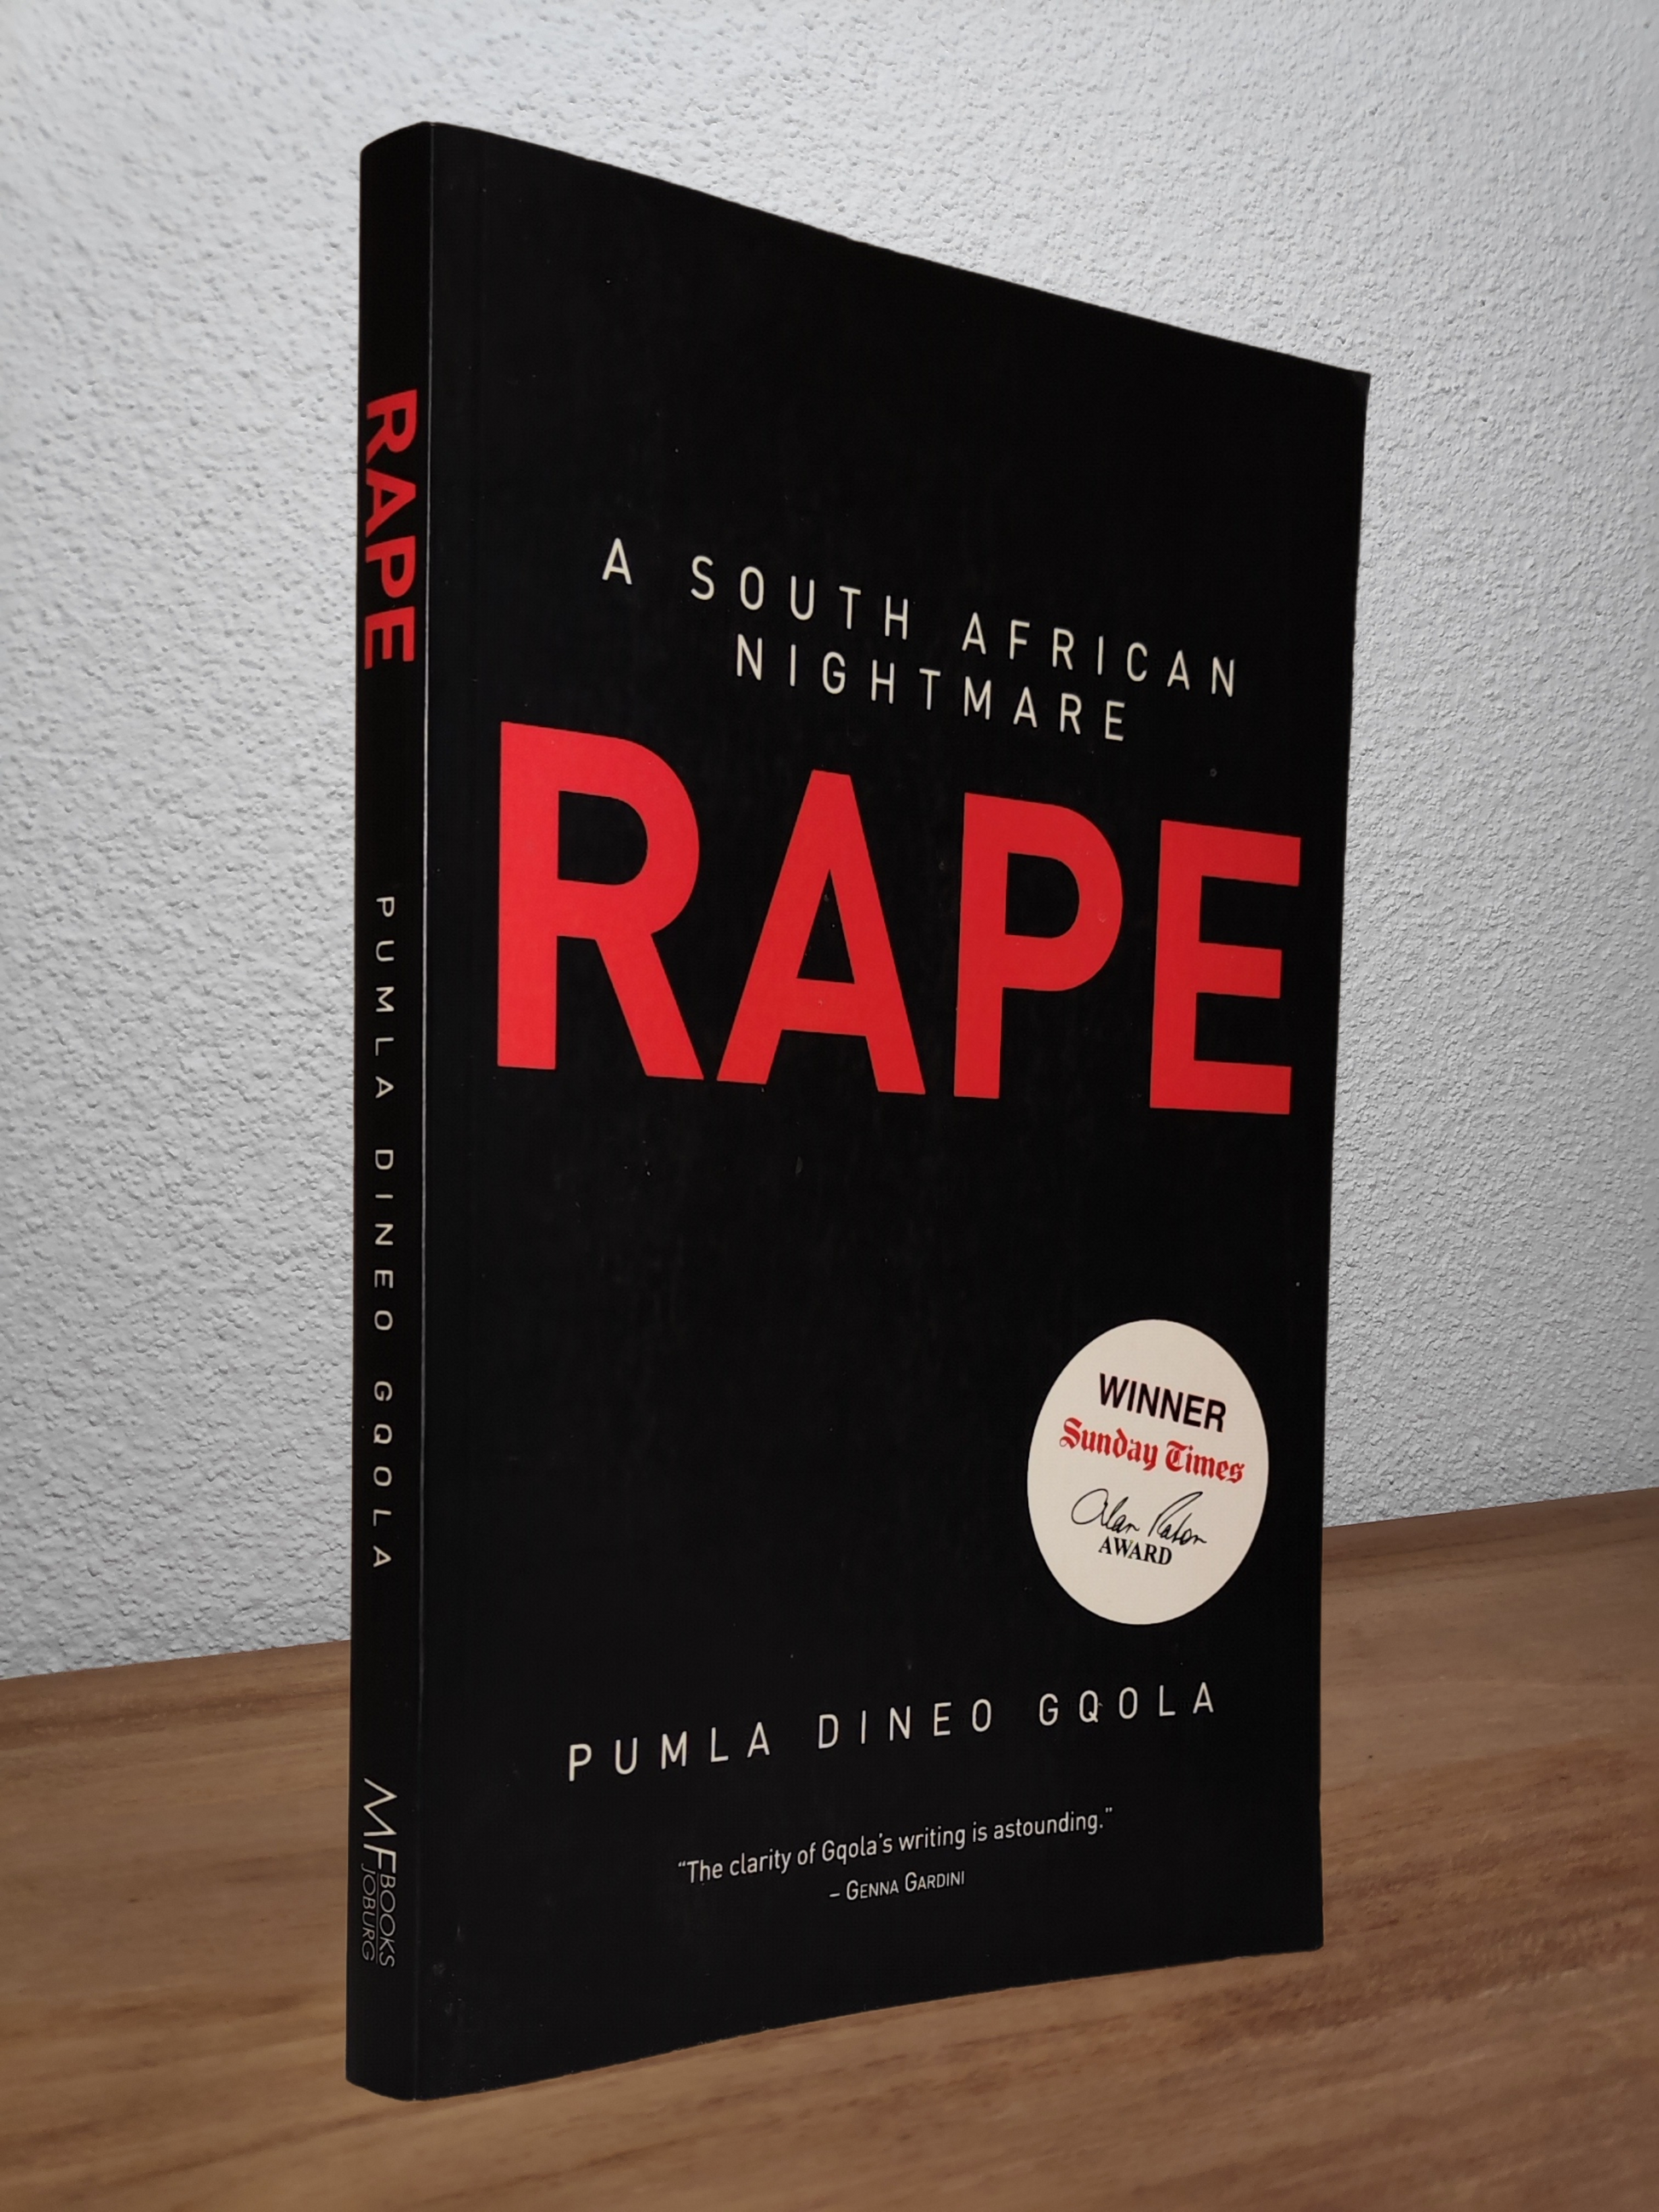 Pumla Dineo Gqola - Rape: A South African Nightmare  - Second-hand english book to deliver in Zurich & Switzerland